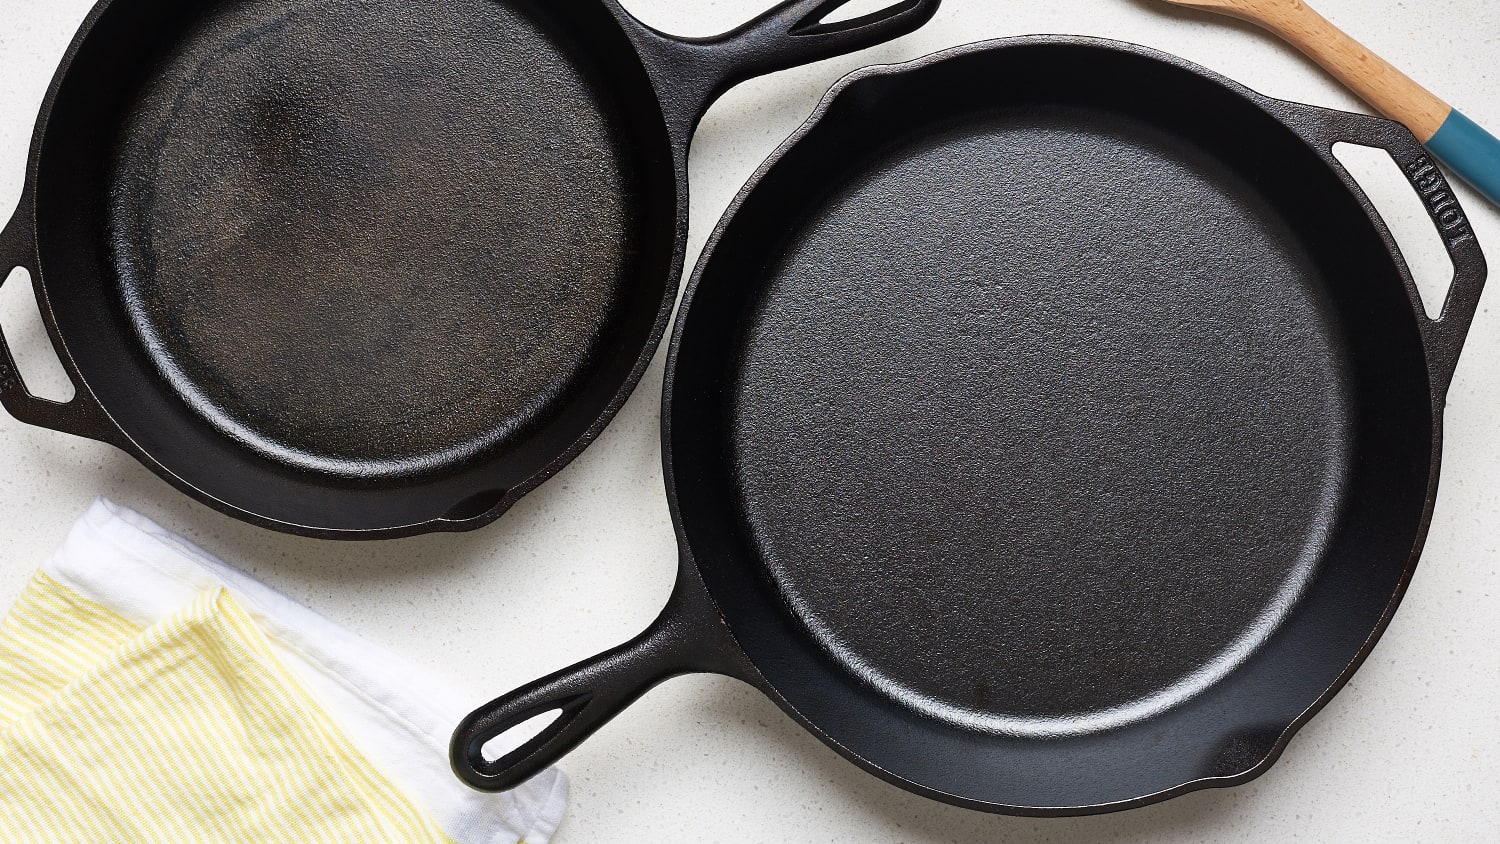 12 Top-Rated  Supplies for Cleaning Your Cast Iron